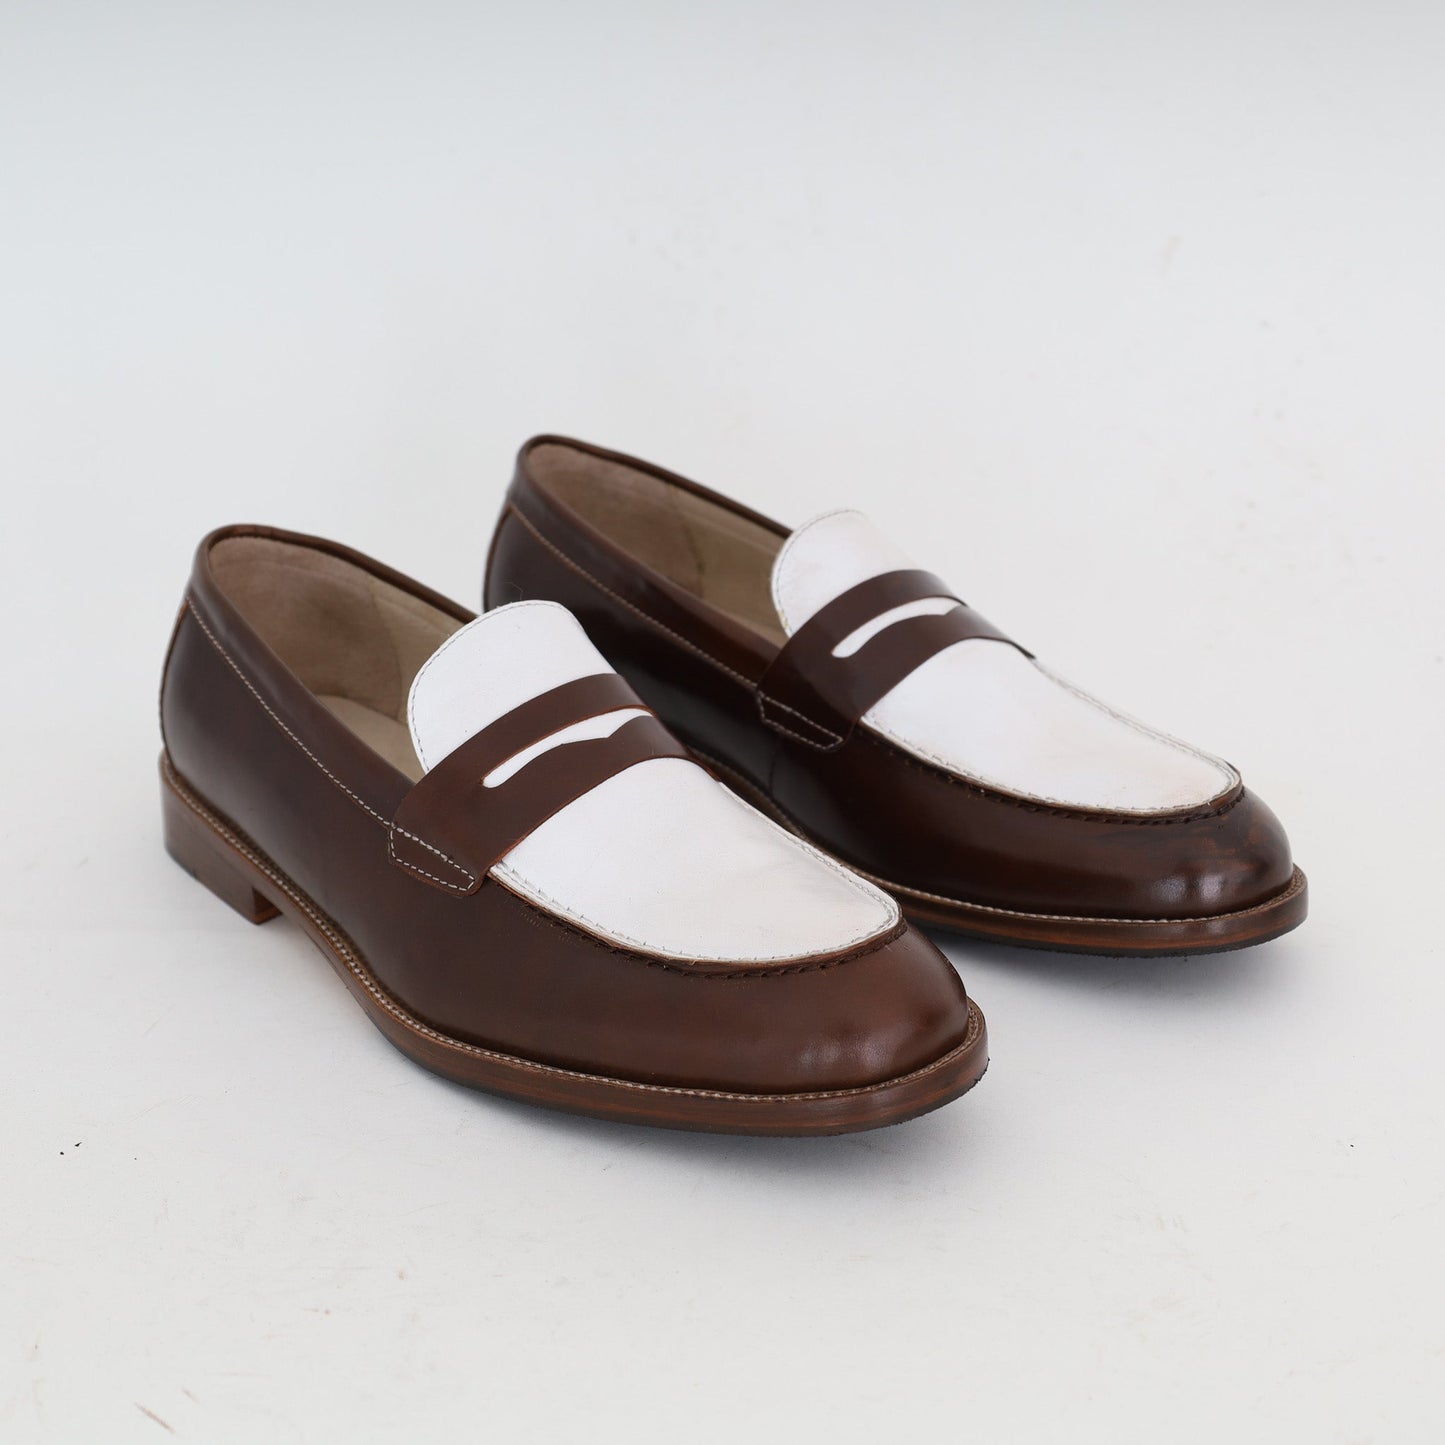 Juba Brown x White Penny loafer